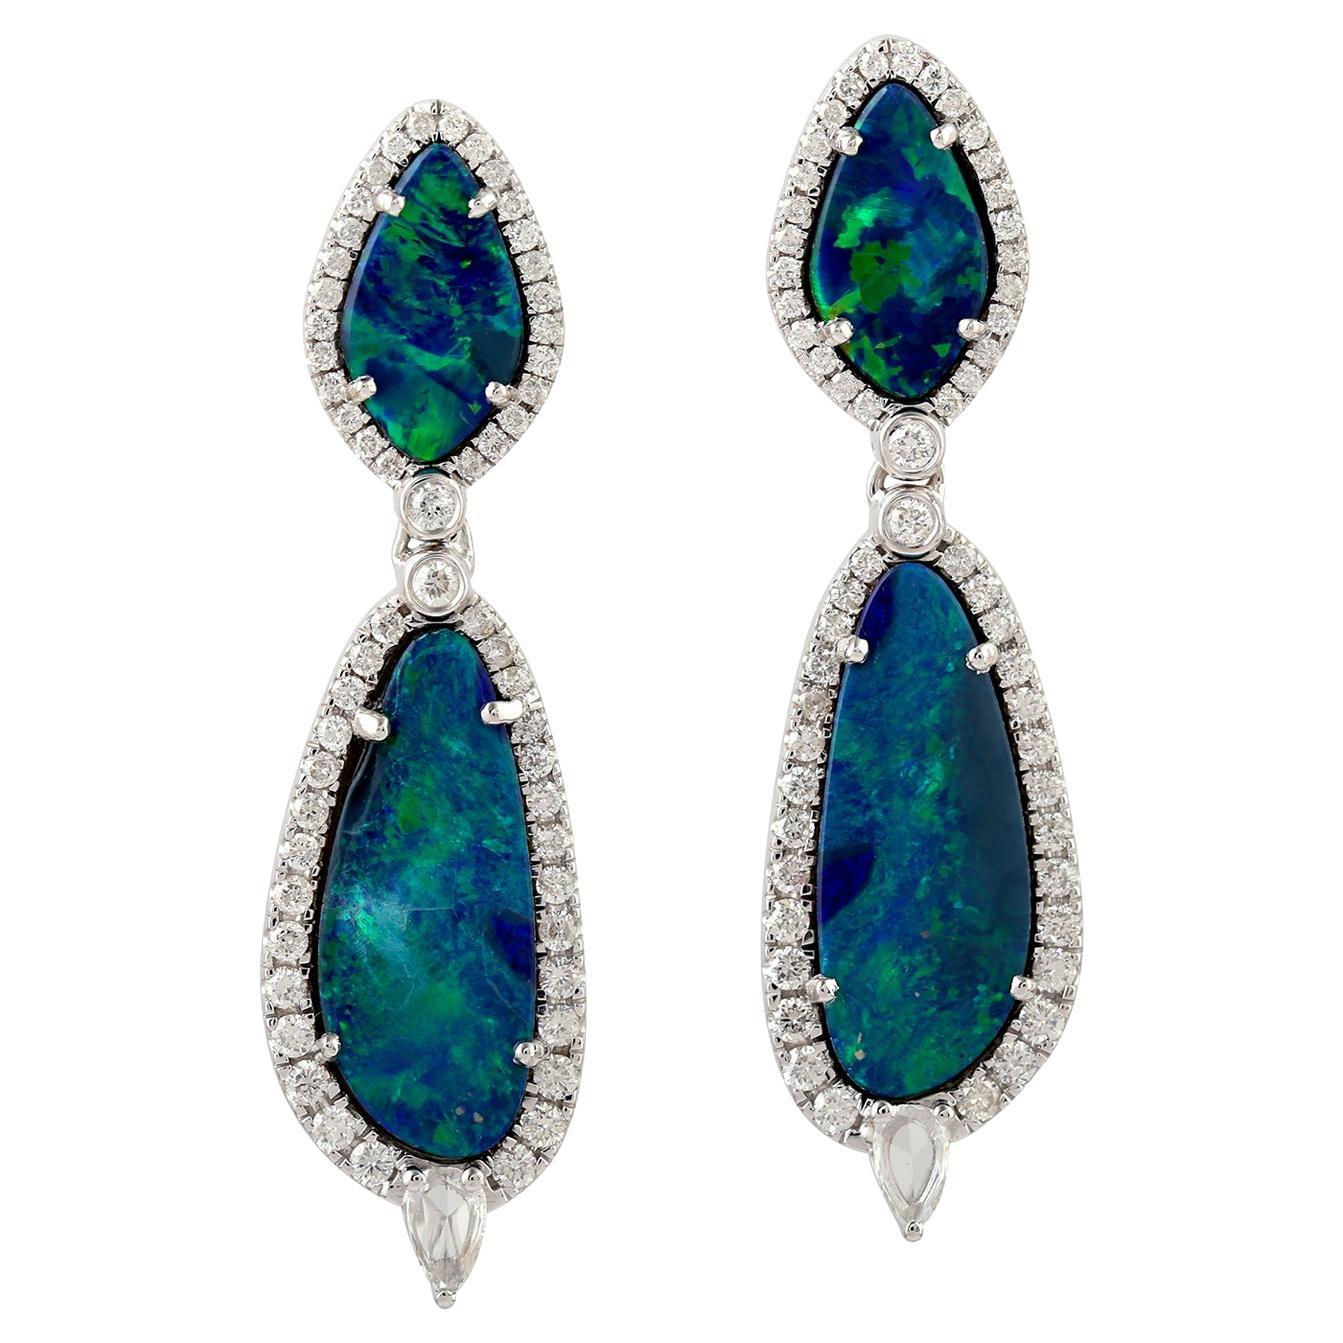 7.38 ct Opal Dangle Earrings With Diamonds Made In 18k White Gold